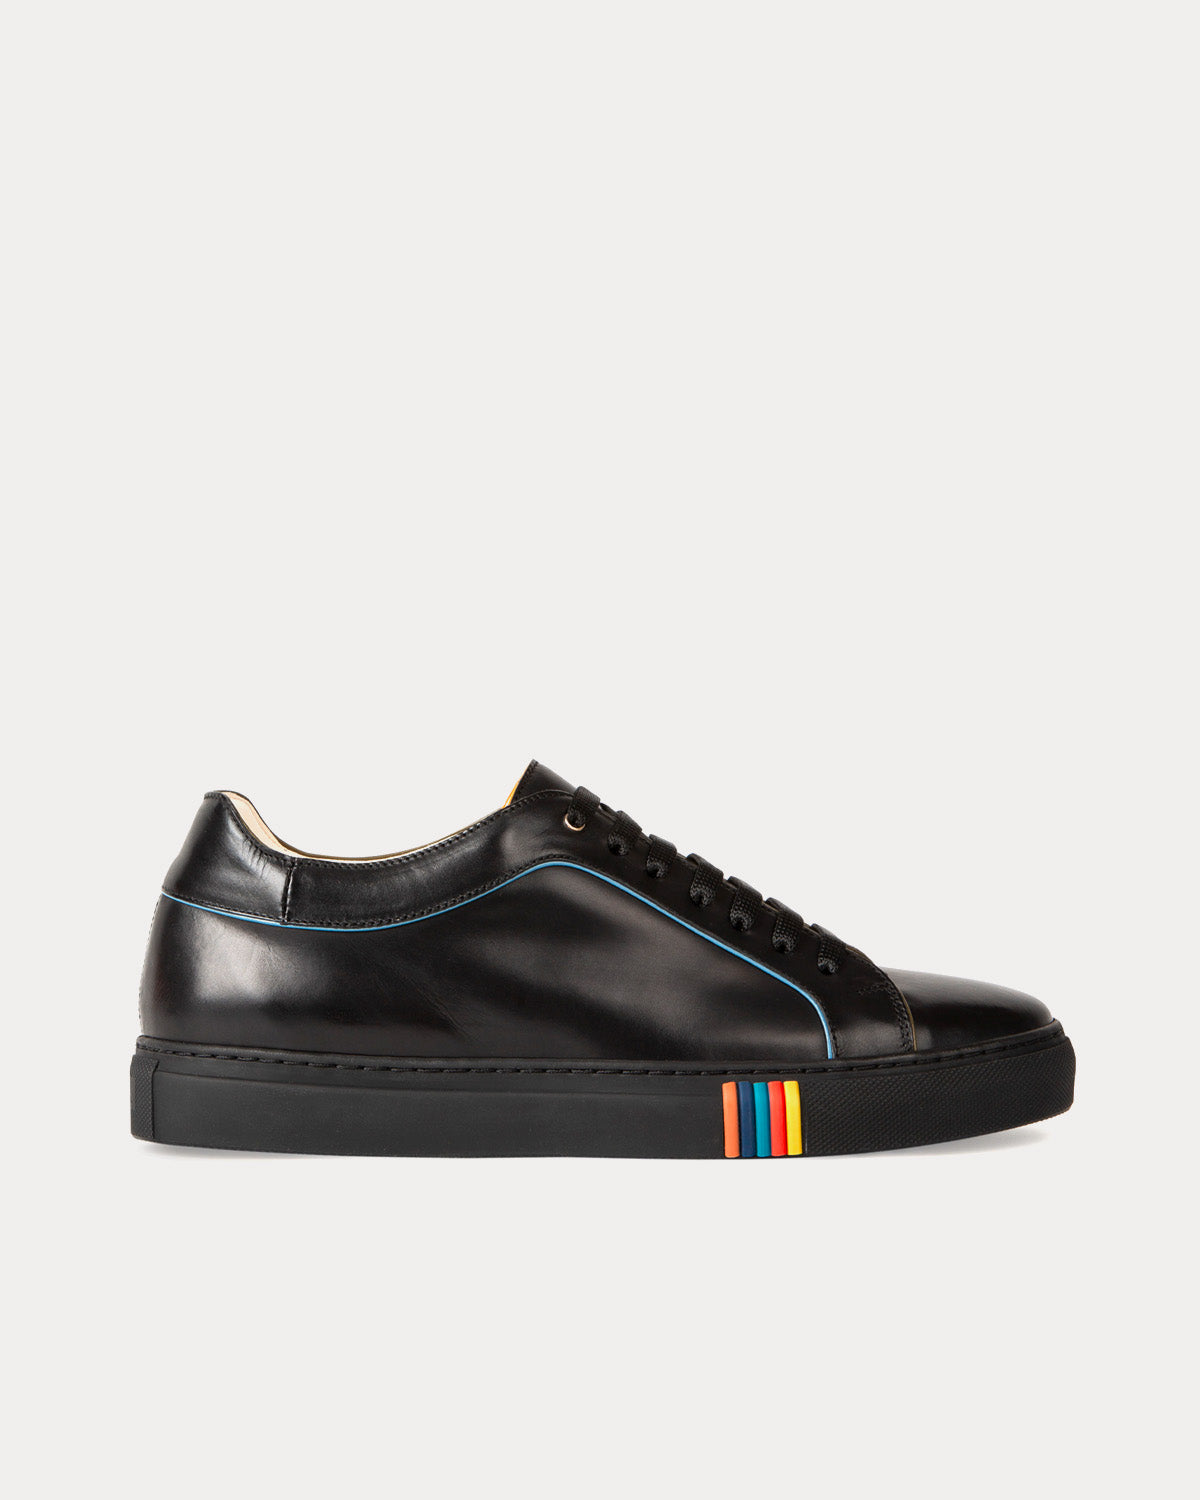 Paul Smith - Basso with Artist Stripe Trim Black Low Top Sneakers